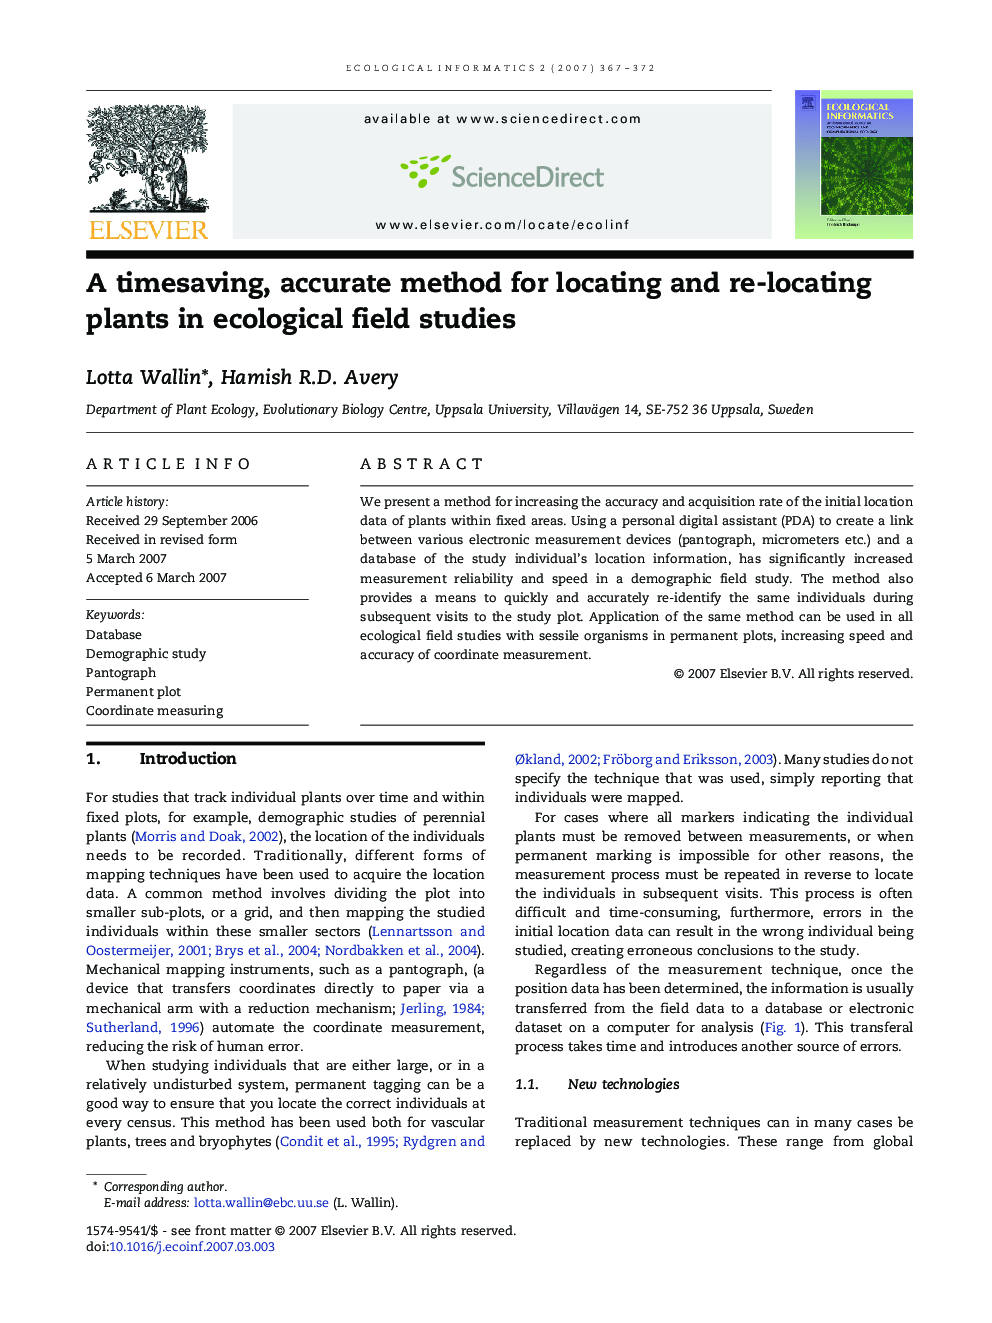 A timesaving, accurate method for locating and re-locating plants in ecological field studies